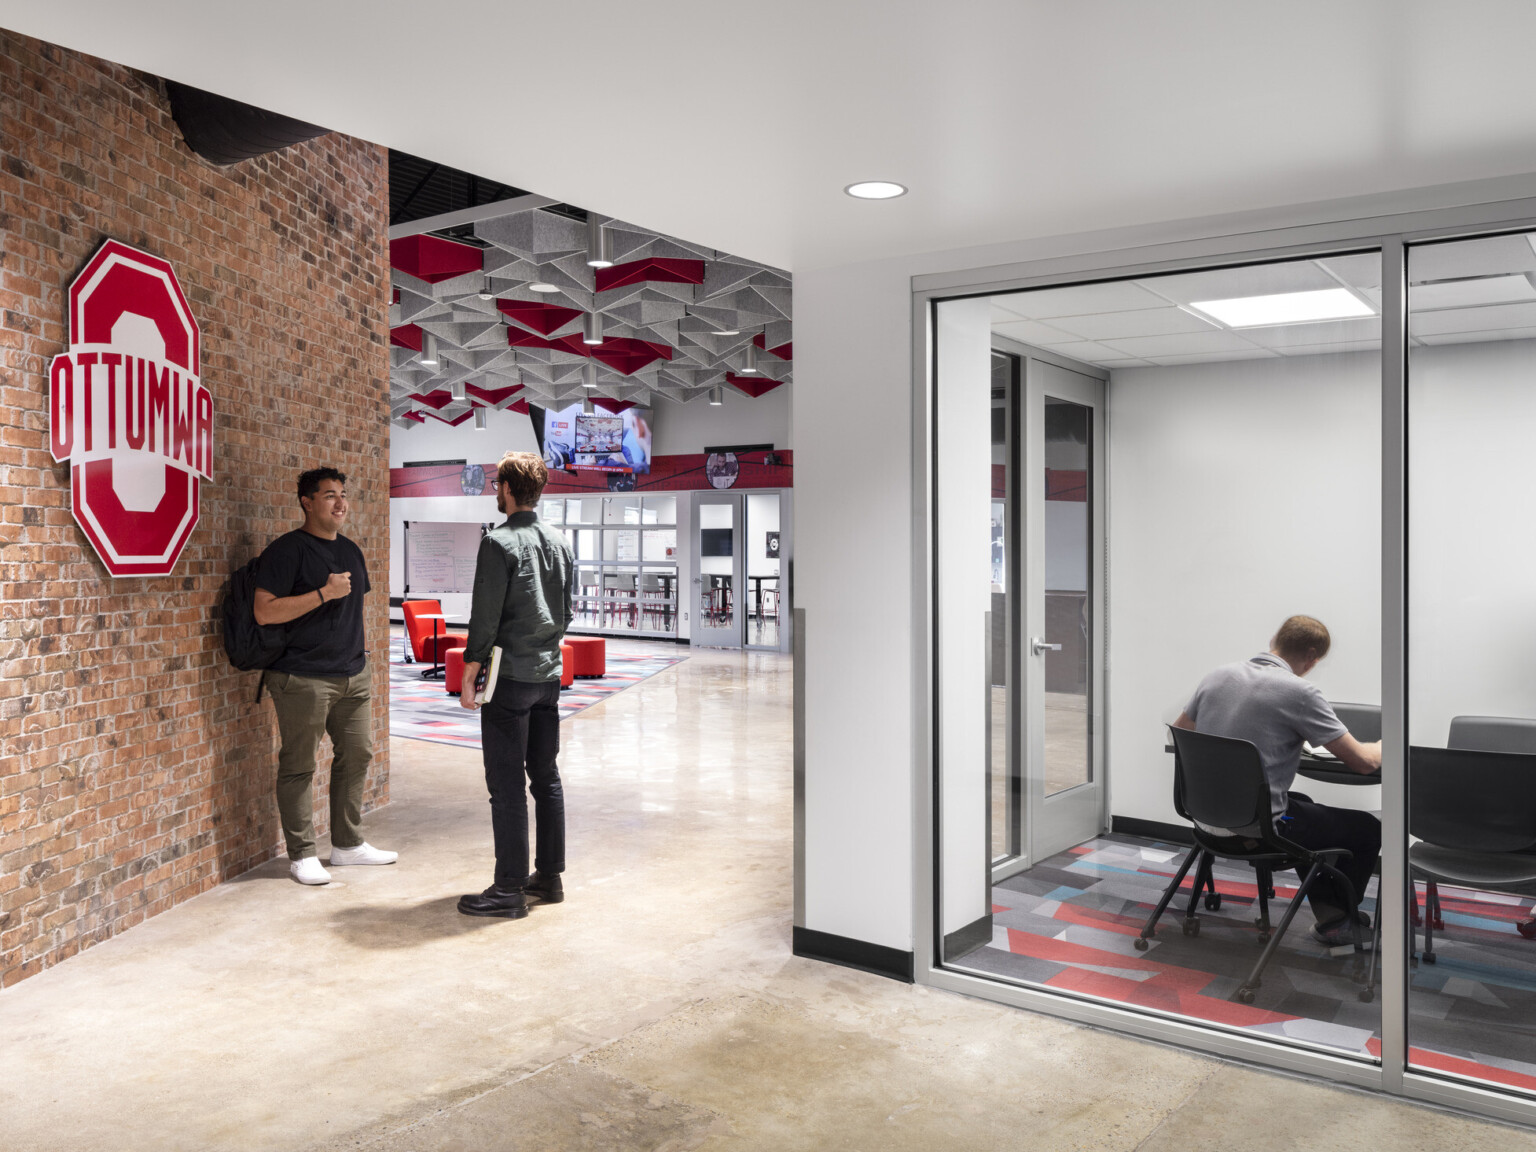 entryway to commons area, signage, two students converse, student in small, glass-walled private work areas provide quiet for focus